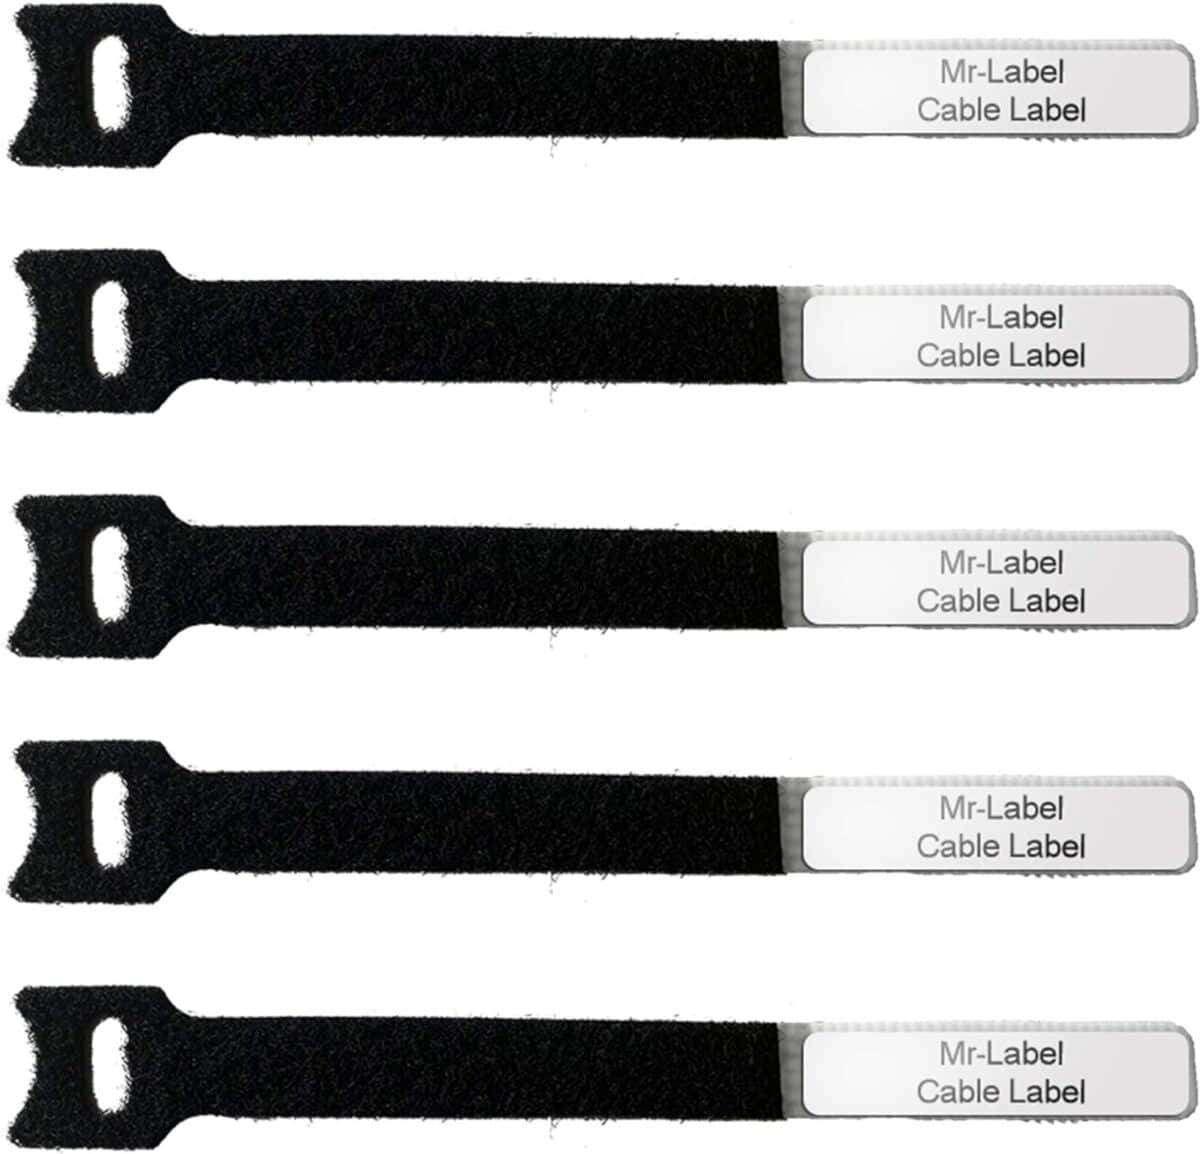 Mr-Label -1/2" Write on Cinch Straps - photo from amazon